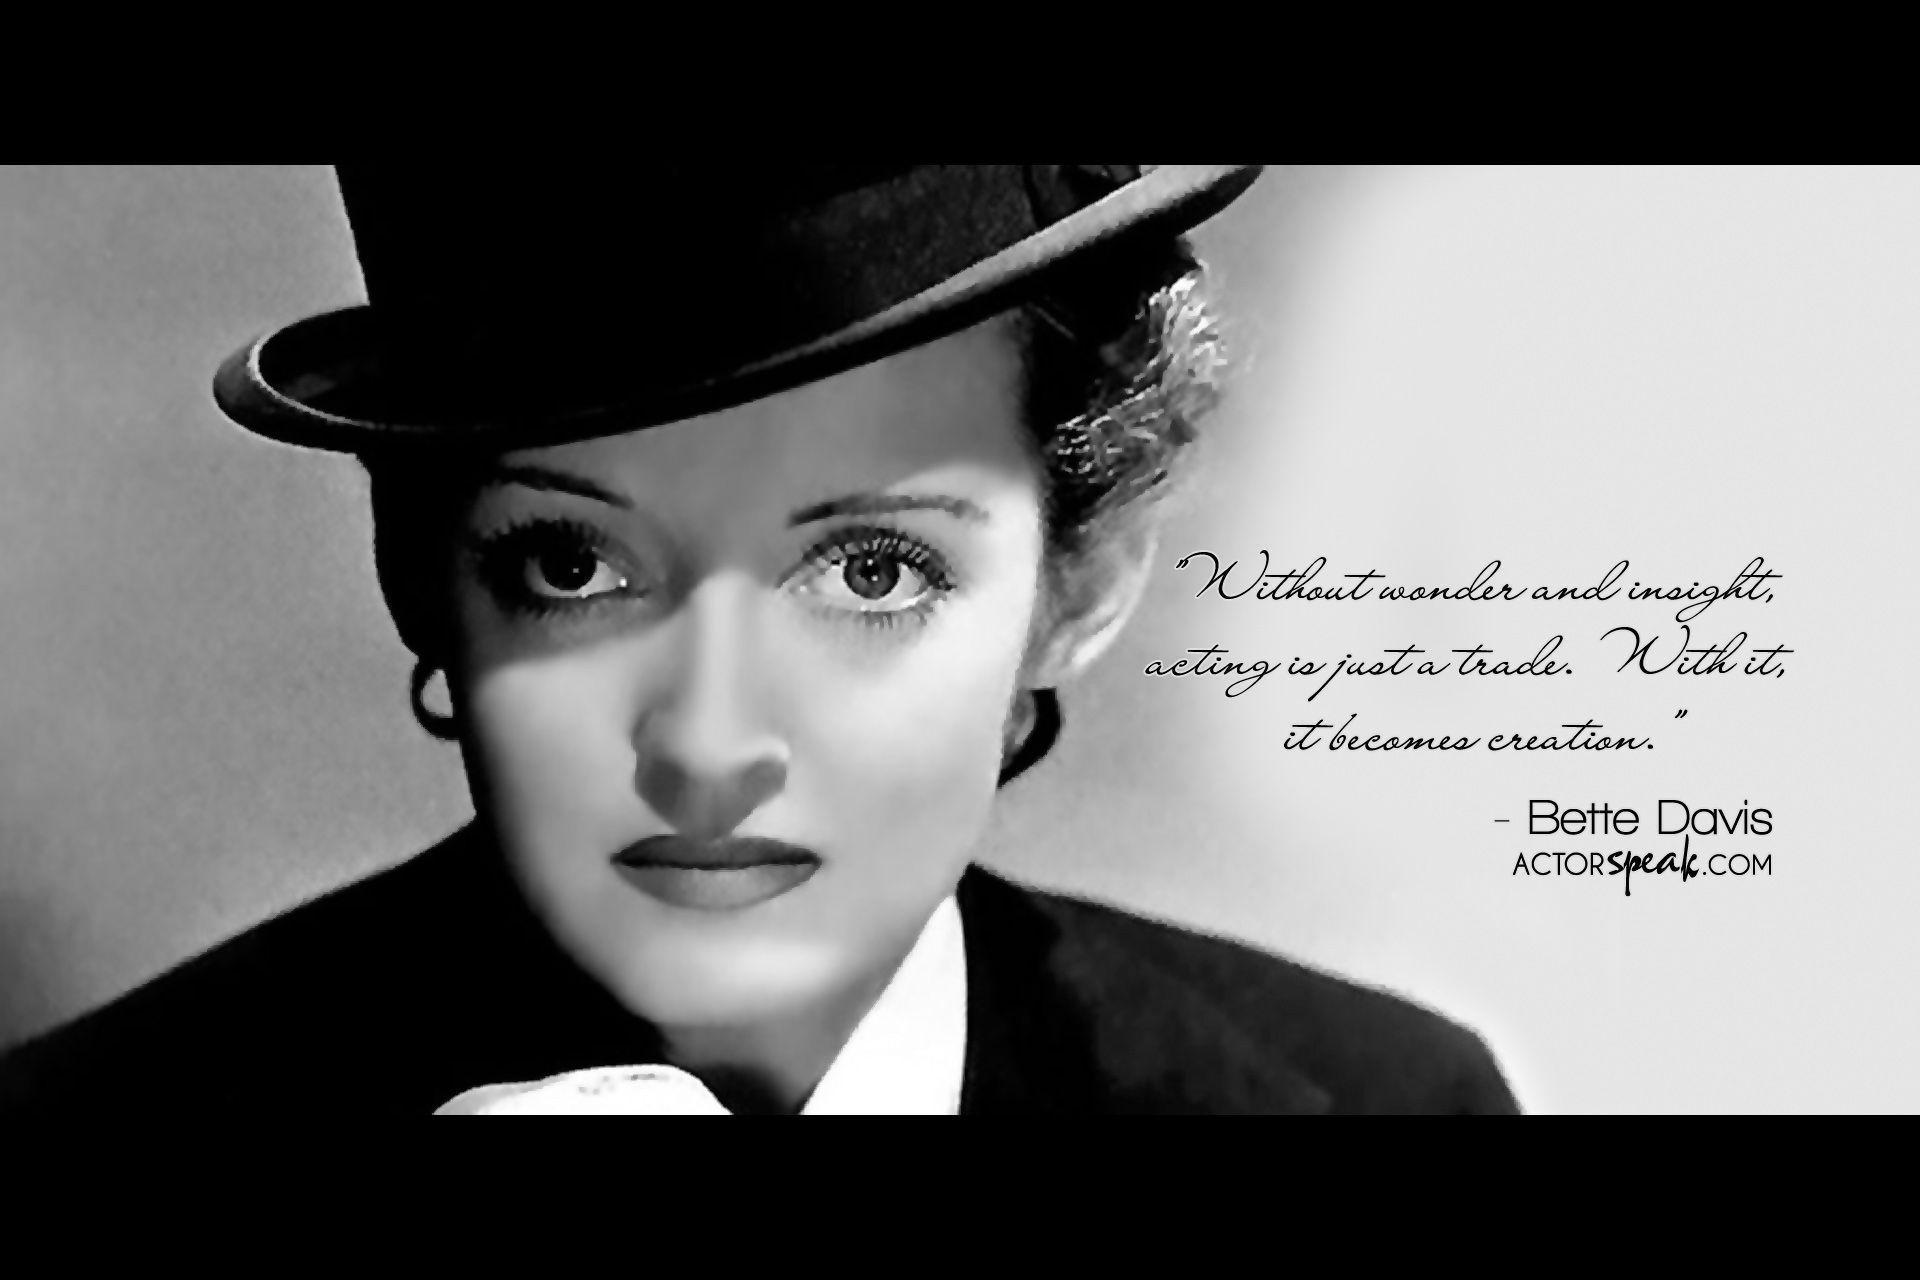 Free 1920 X 1280 Wallpaper. Quote By Bette Davis. Design By Sally